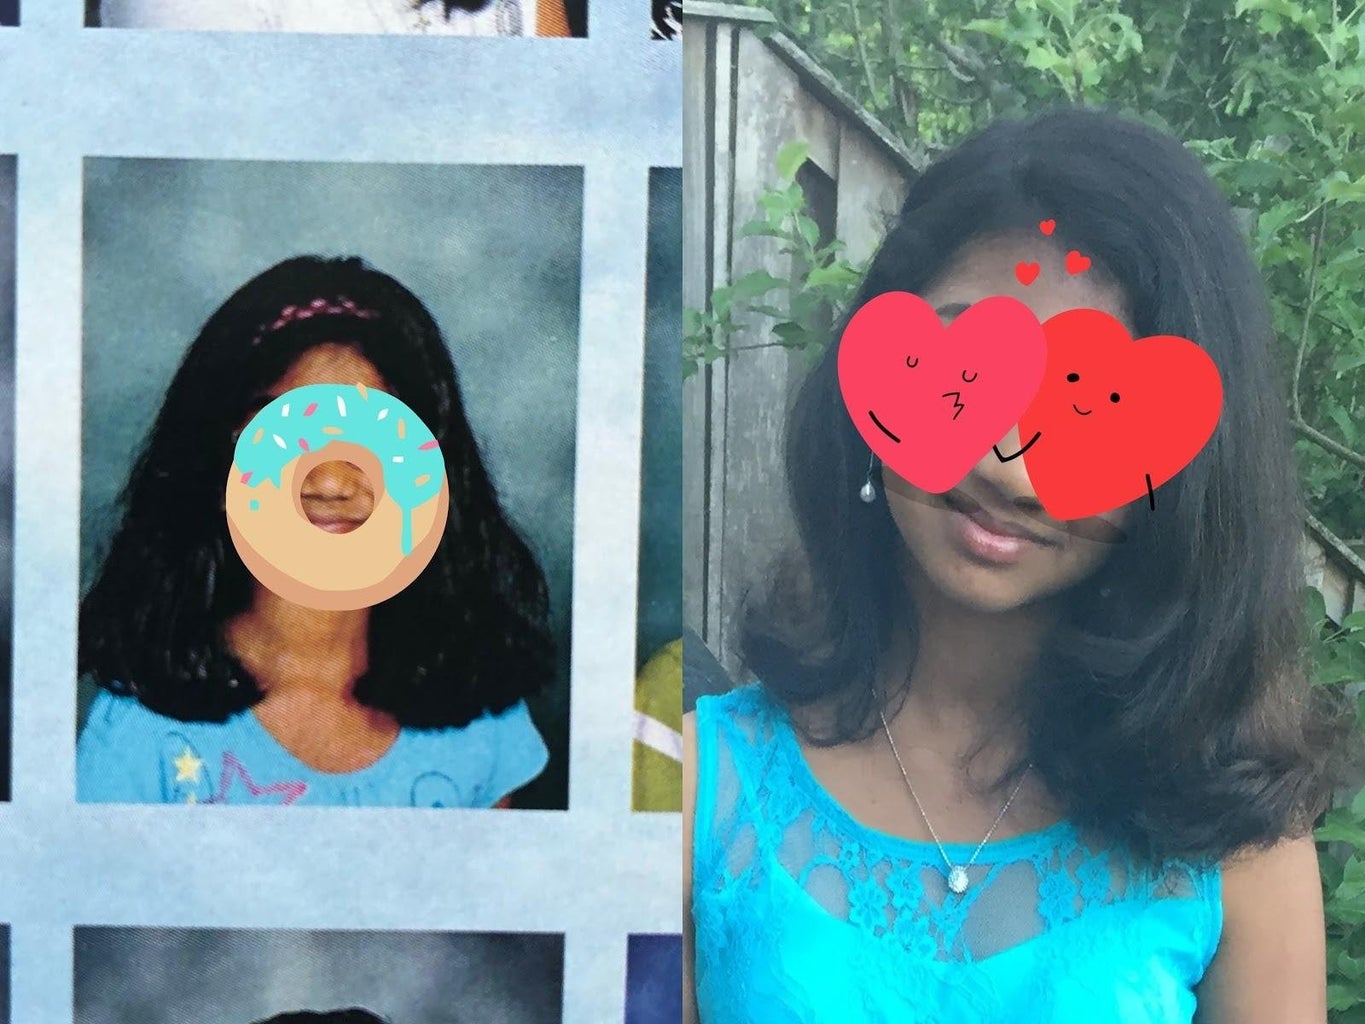 Two photos of me from middle school (face blurred out)